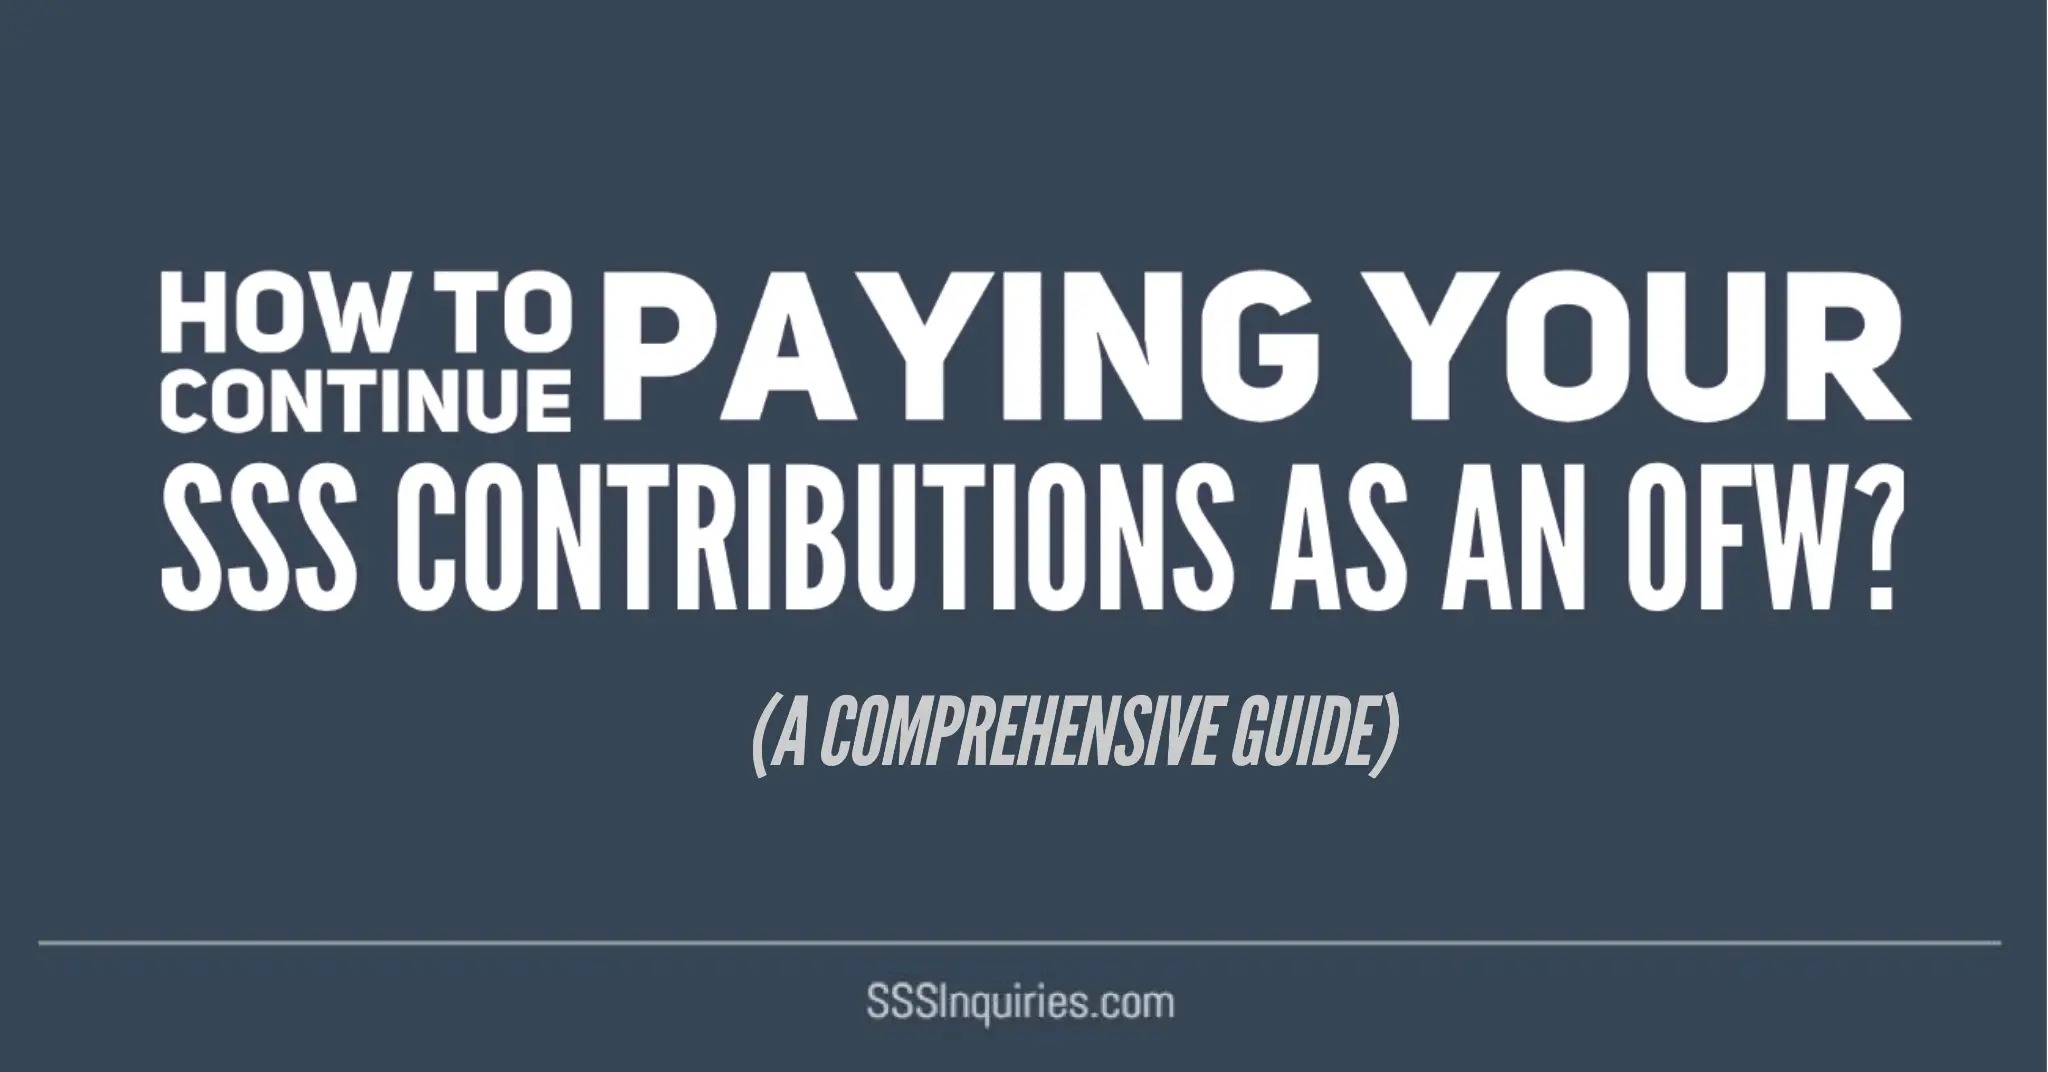 How to Continue Paying your SSS Contributions as an OFW